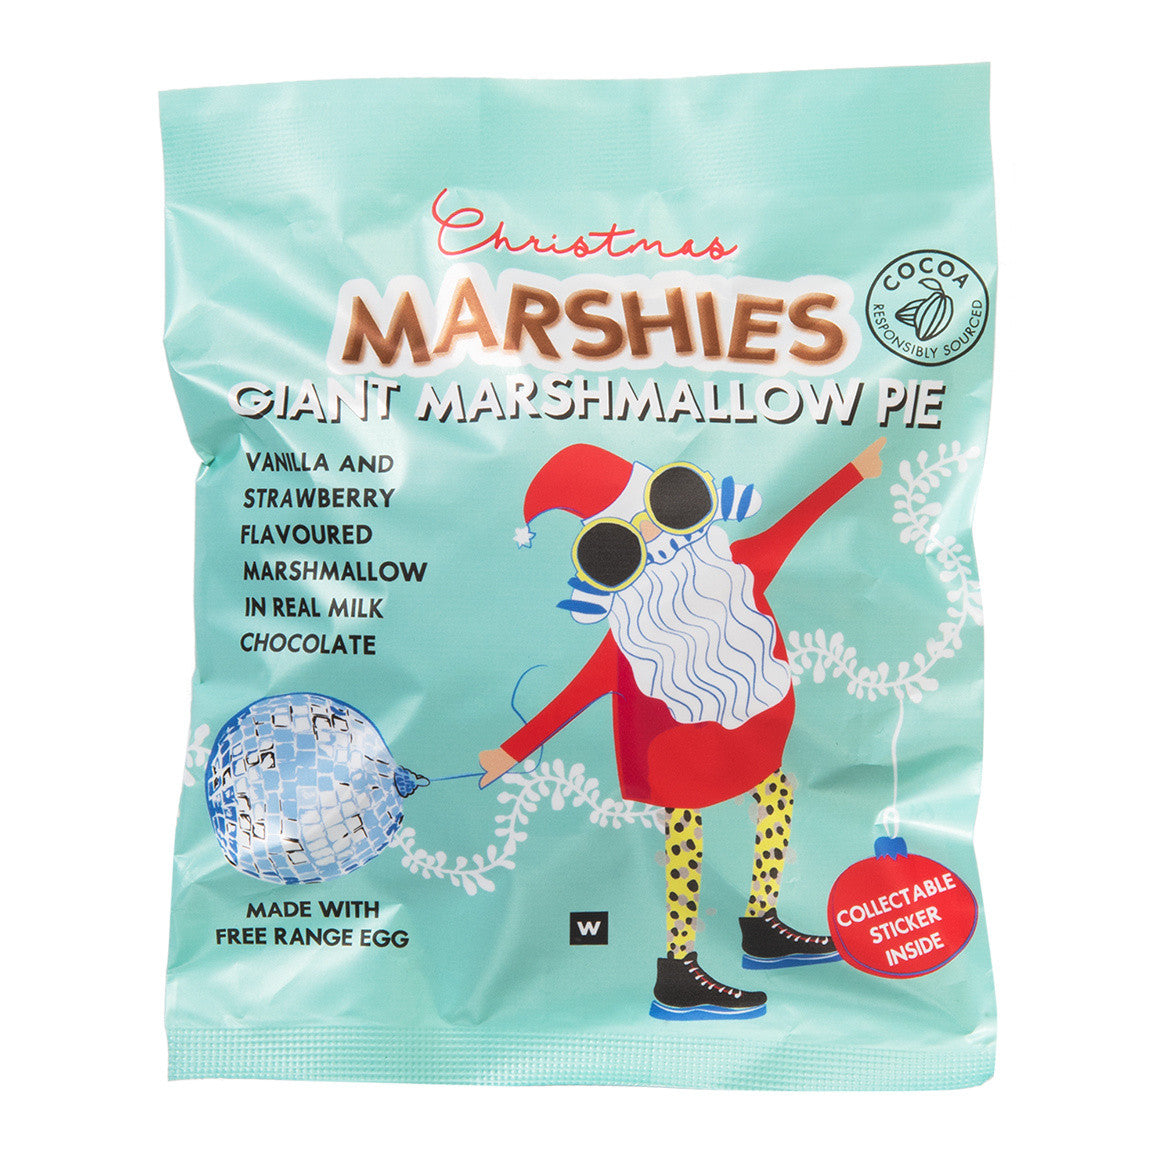 WOOLWORTHS  GIANT XMAS MALLOW PIES 60G